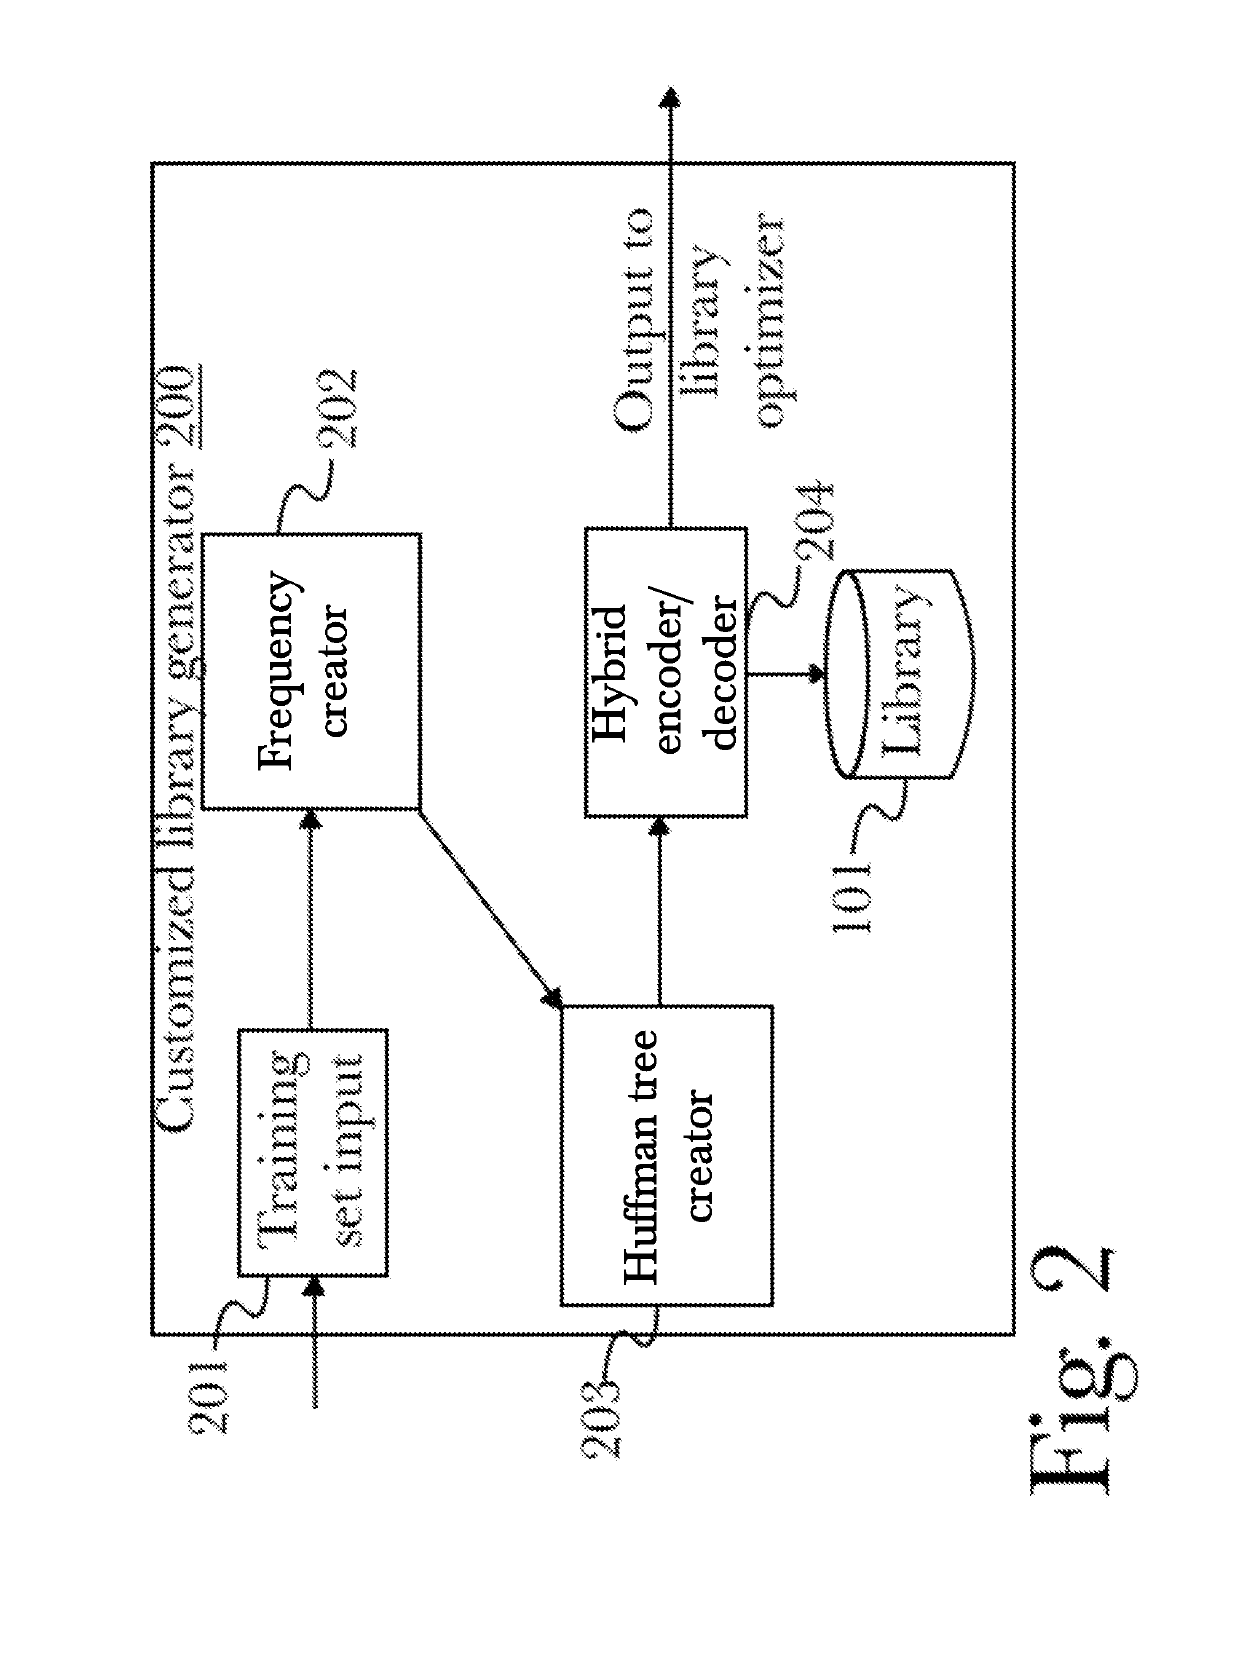 System and method for high-speed transfer of small data sets